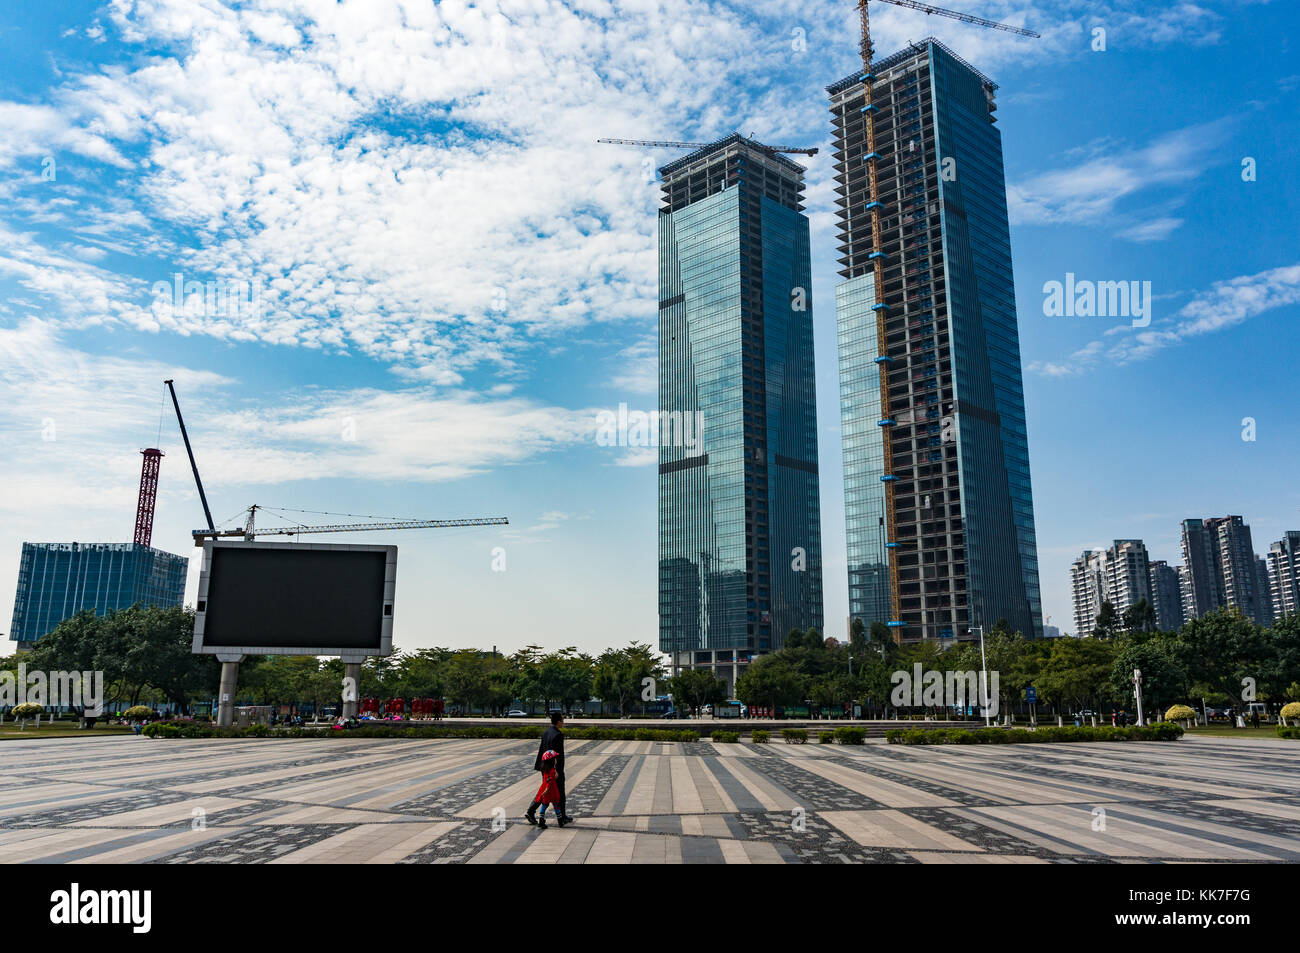 Father and daughter walking in vast city square as unfinished skyscrapers buildings loom in the distance in Shenzhen, Guangdong Province, China Stock Photo